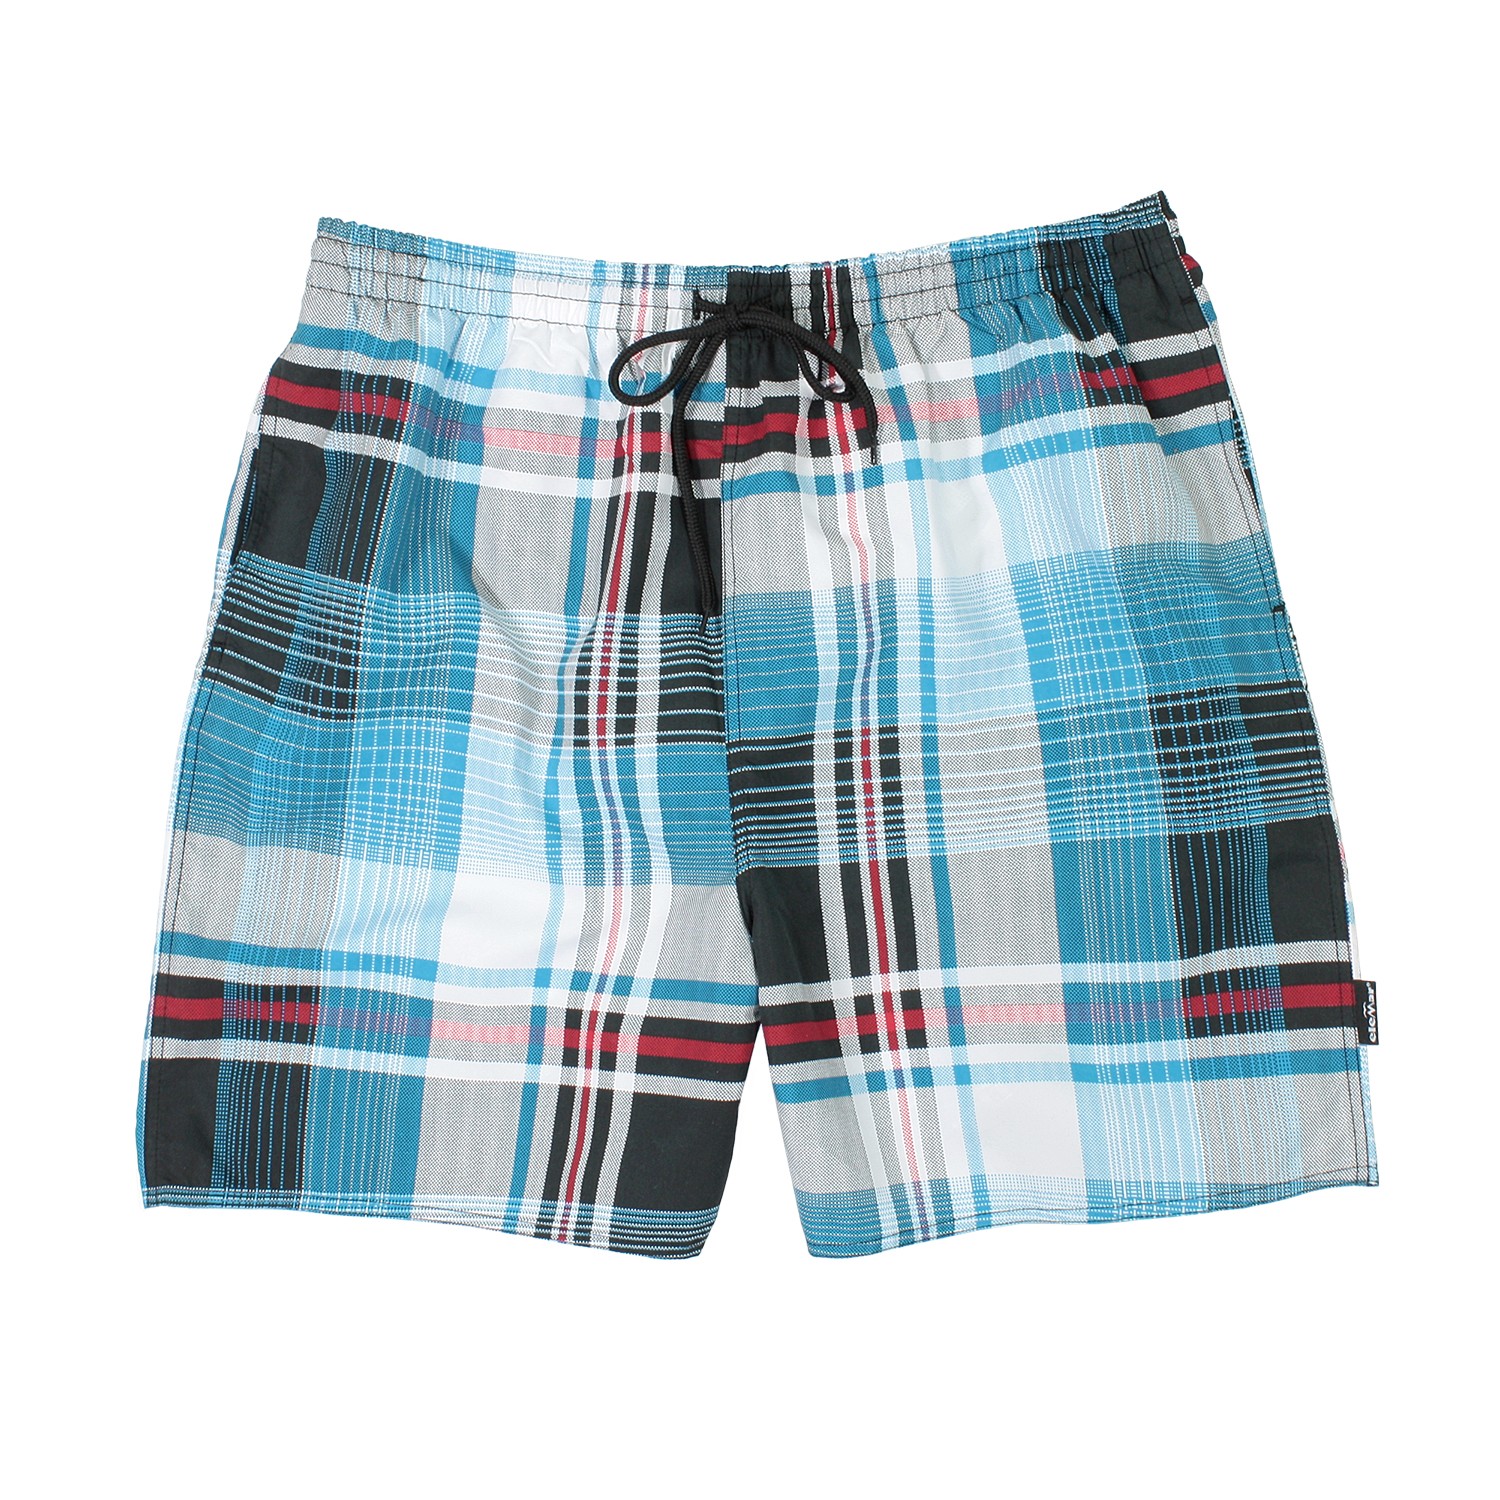 Swim shorts by eleMar for men blue checkered in oversizes up to 10XL